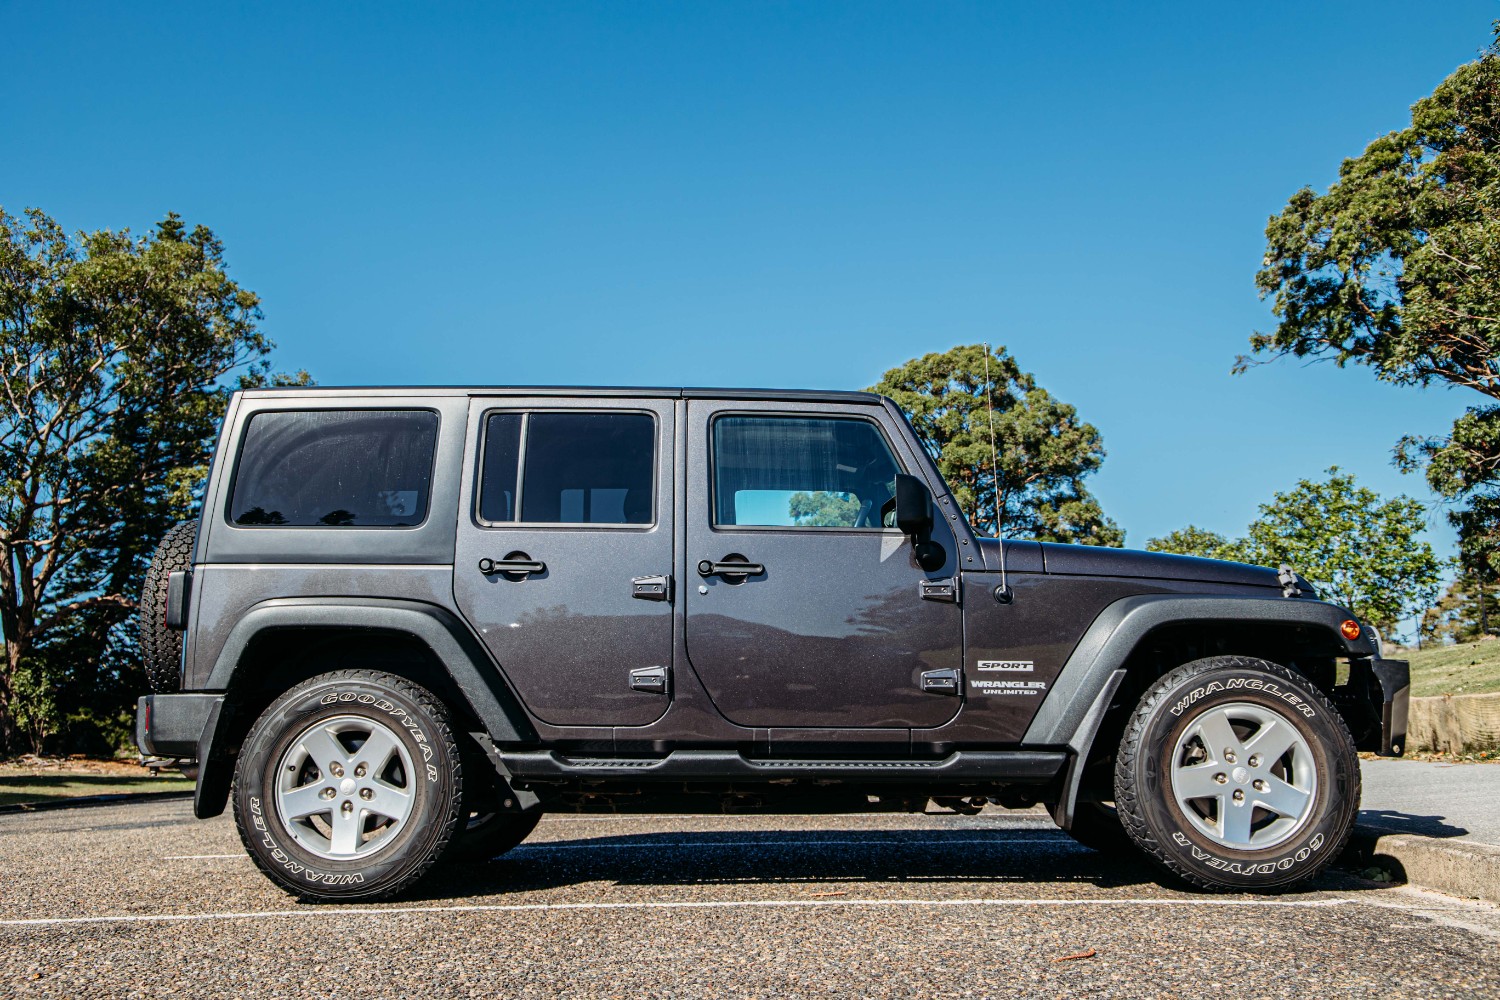 2014 Jeep Wrangler Unlimited - Sport Convertible Image 17